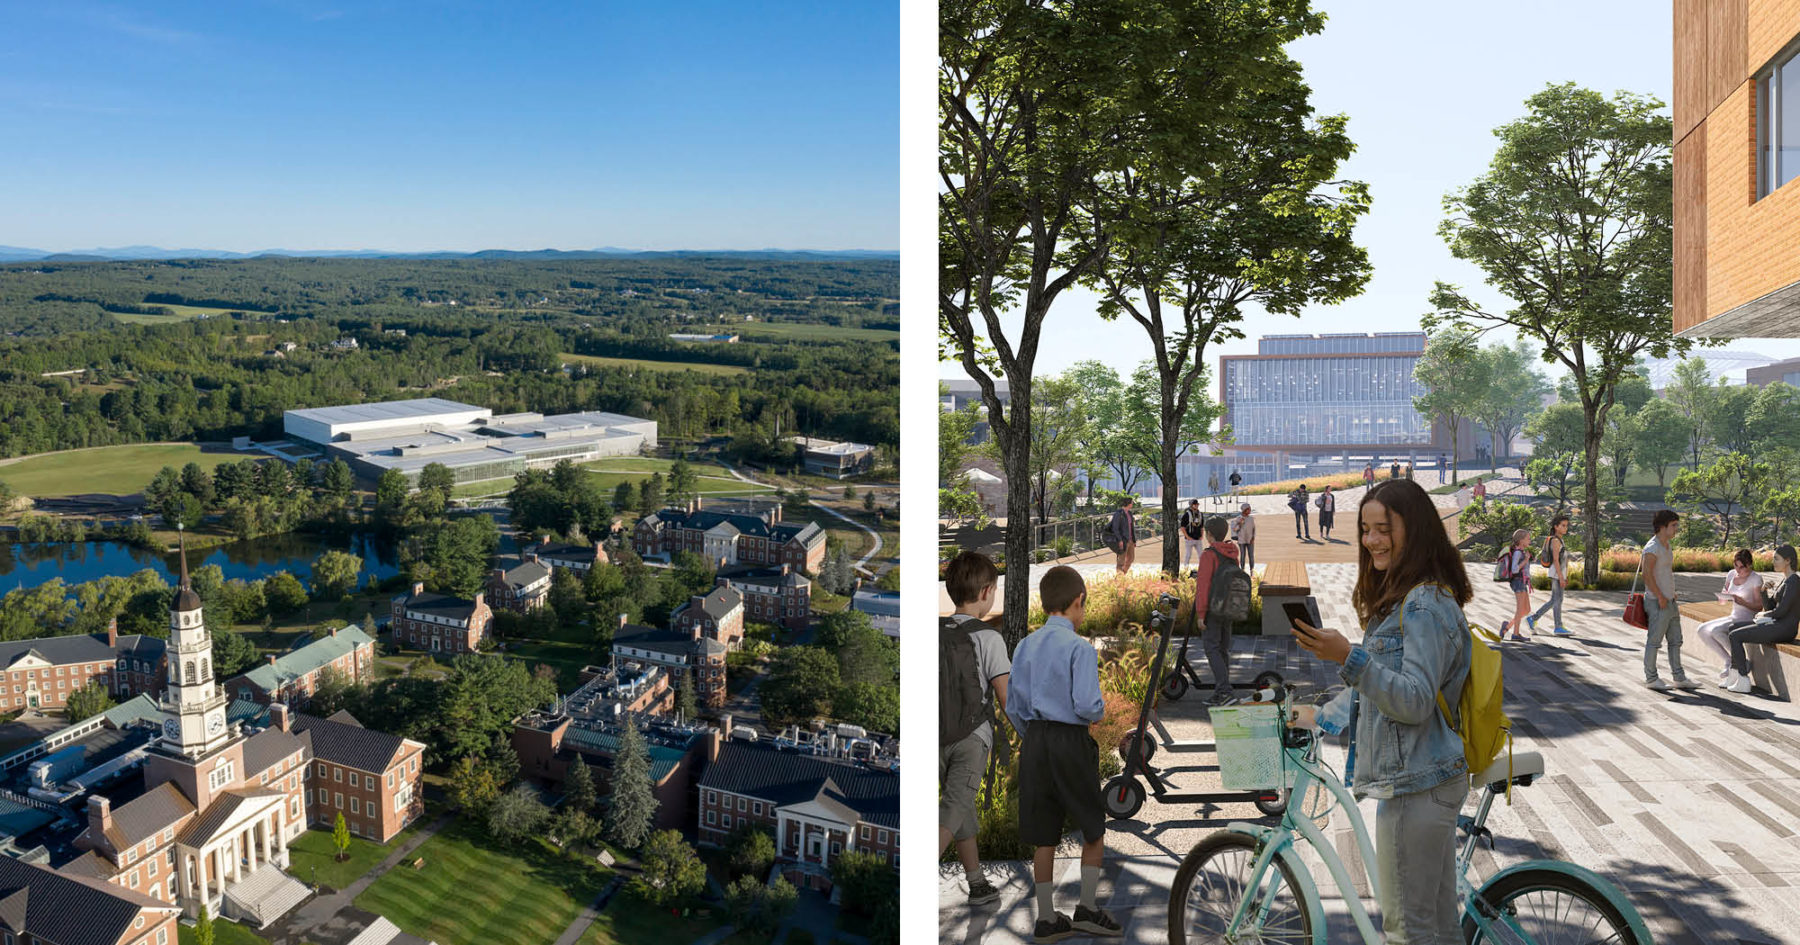 Image on the left is an aerial view of the new Colby College Harold Alfond Athletics and Recreation Center; image on the right is a rendering showing a student on her bike surrounded by other people going to and from class on campus